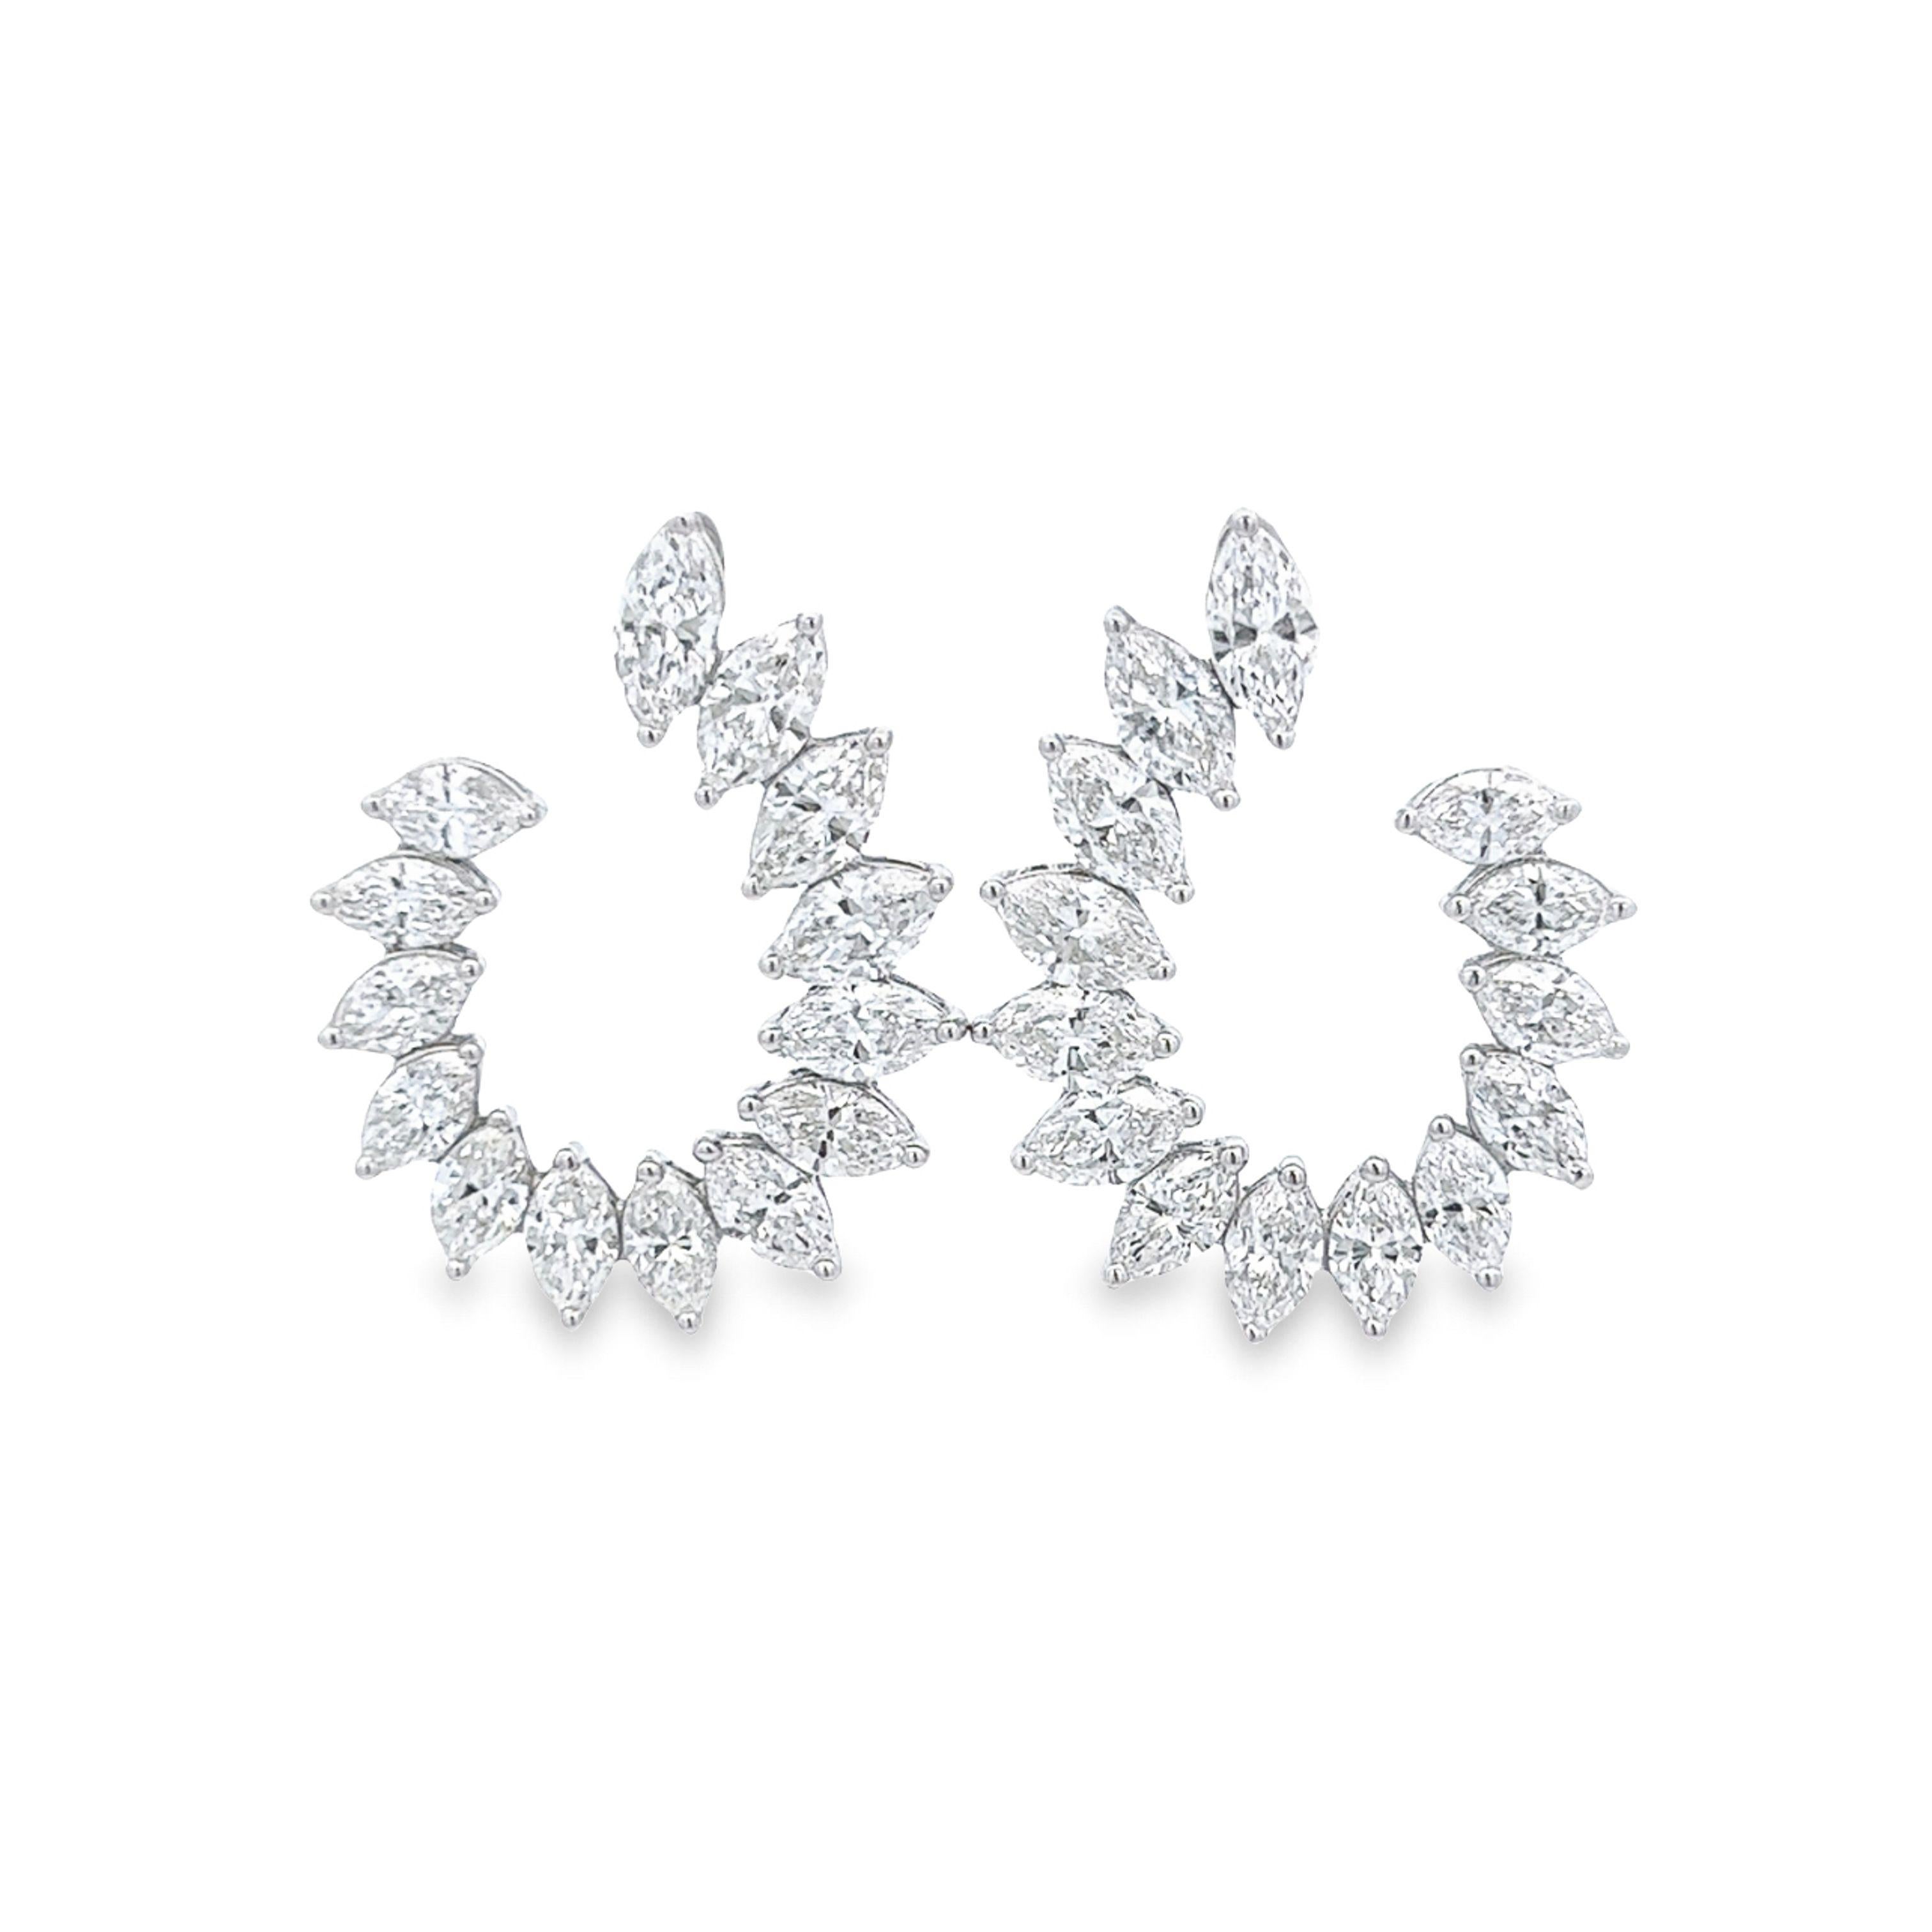 Stunning illusion set diamond cluster earrings diamonds, by Alexander Beverly Hills. 
28 marquise brilliant diamonds, 7.71 carats total. Approximately D-F color and VS clarity. 6.95 grams, 18-karat white gold.
Accommodated with an up-to-date digital